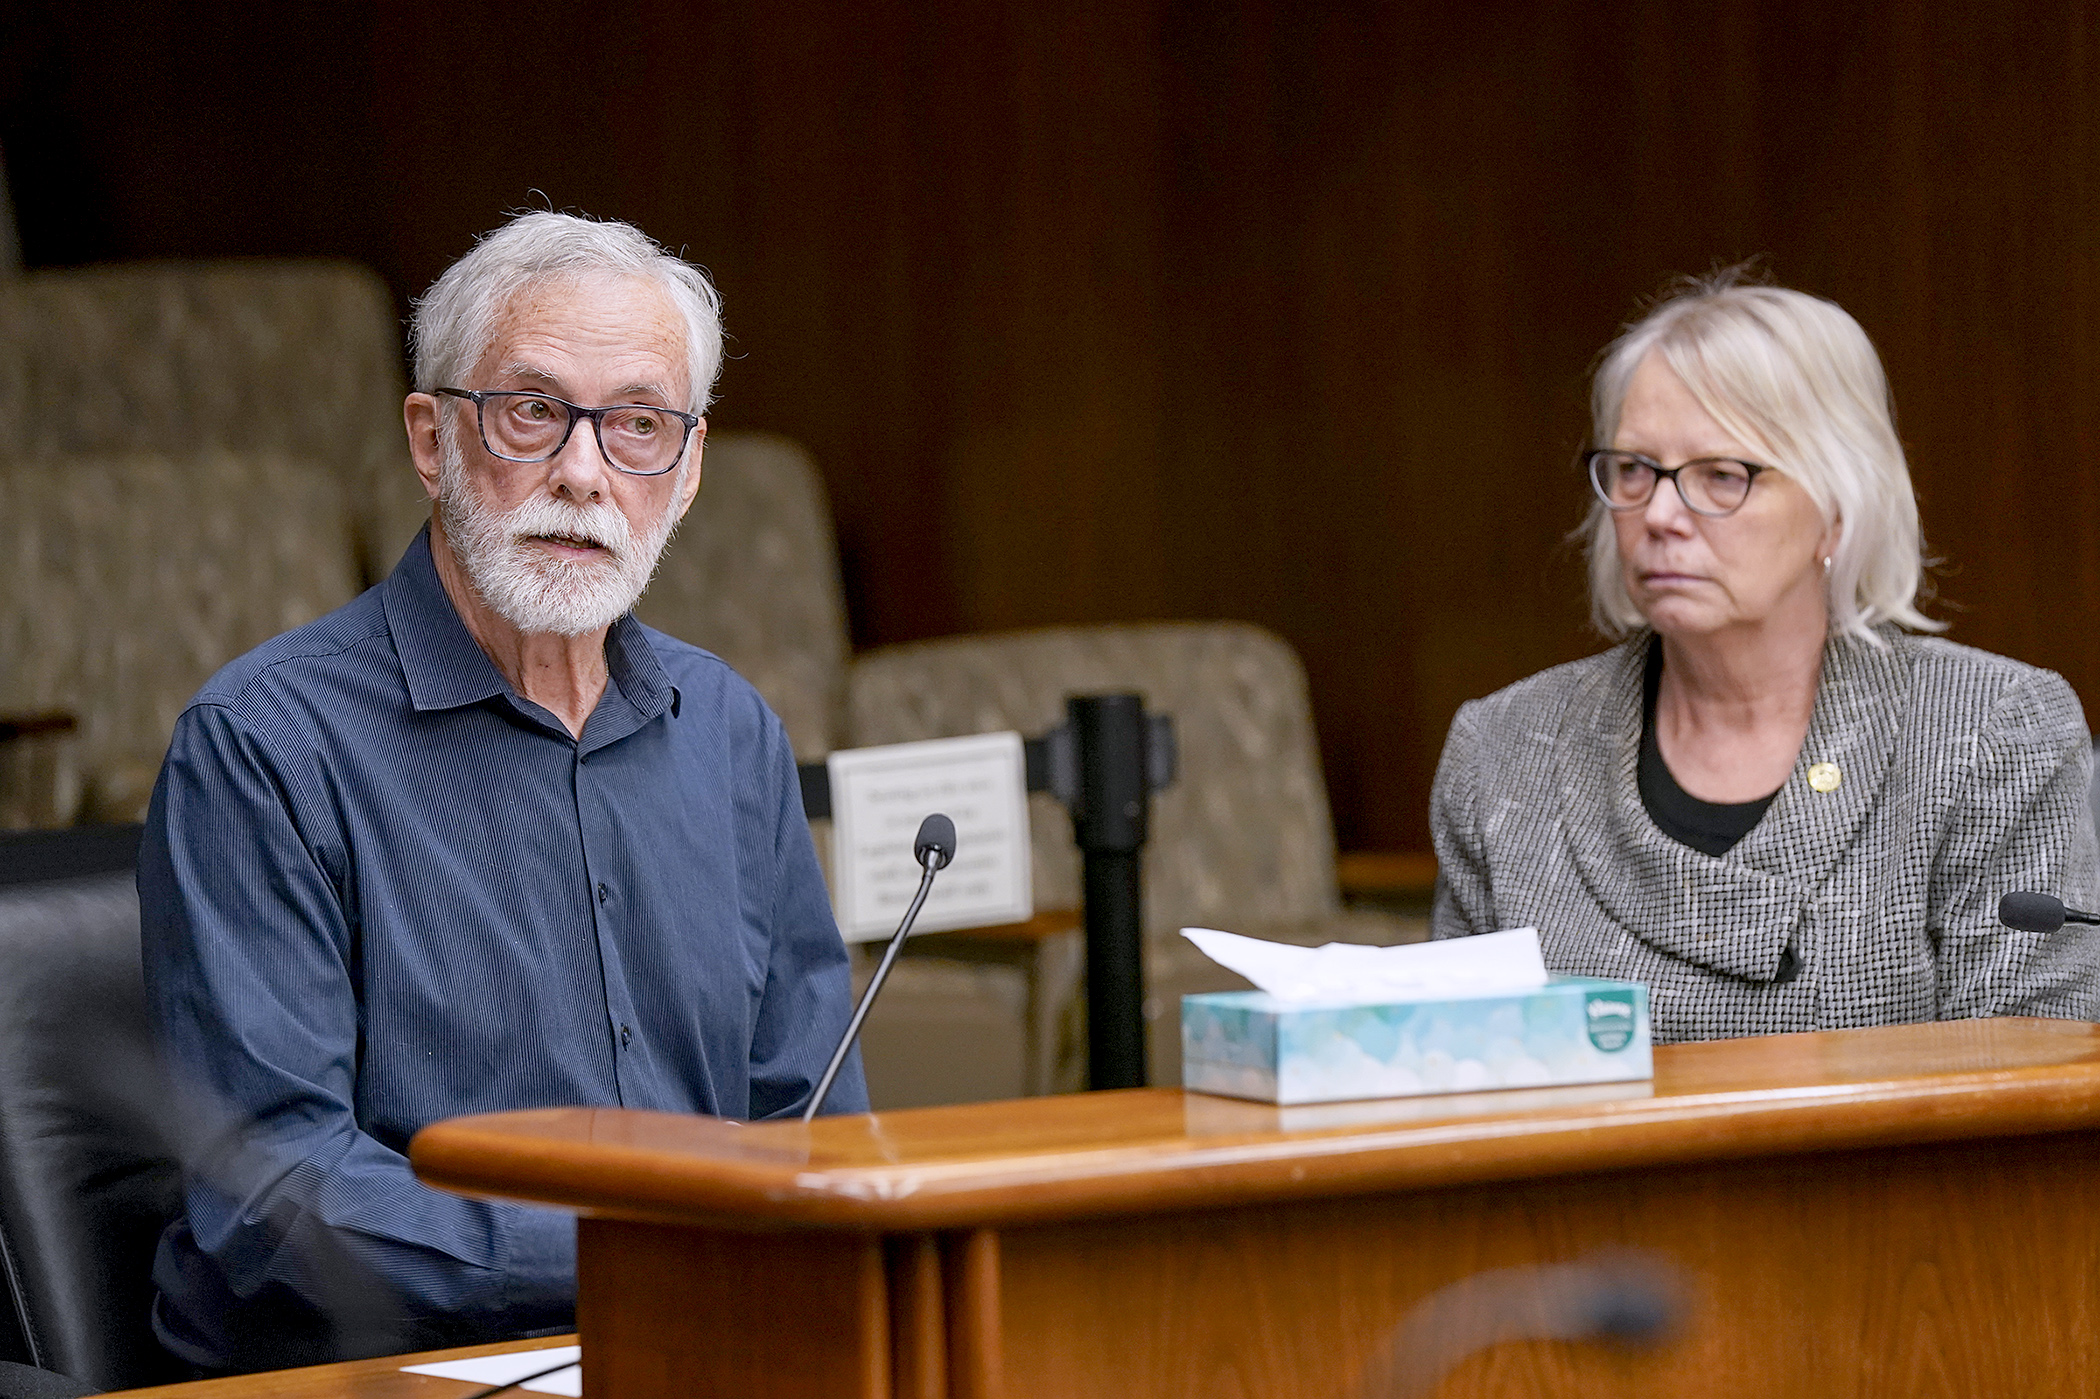 Walt Myers shares his experience with medical debt following the death of his wife. He was testifying before the House Health Finance and Policy Committee March 14 in support of HF1814. Rep. Liz Reyer sponsors the bill. (Photo by Michele Jokinen)